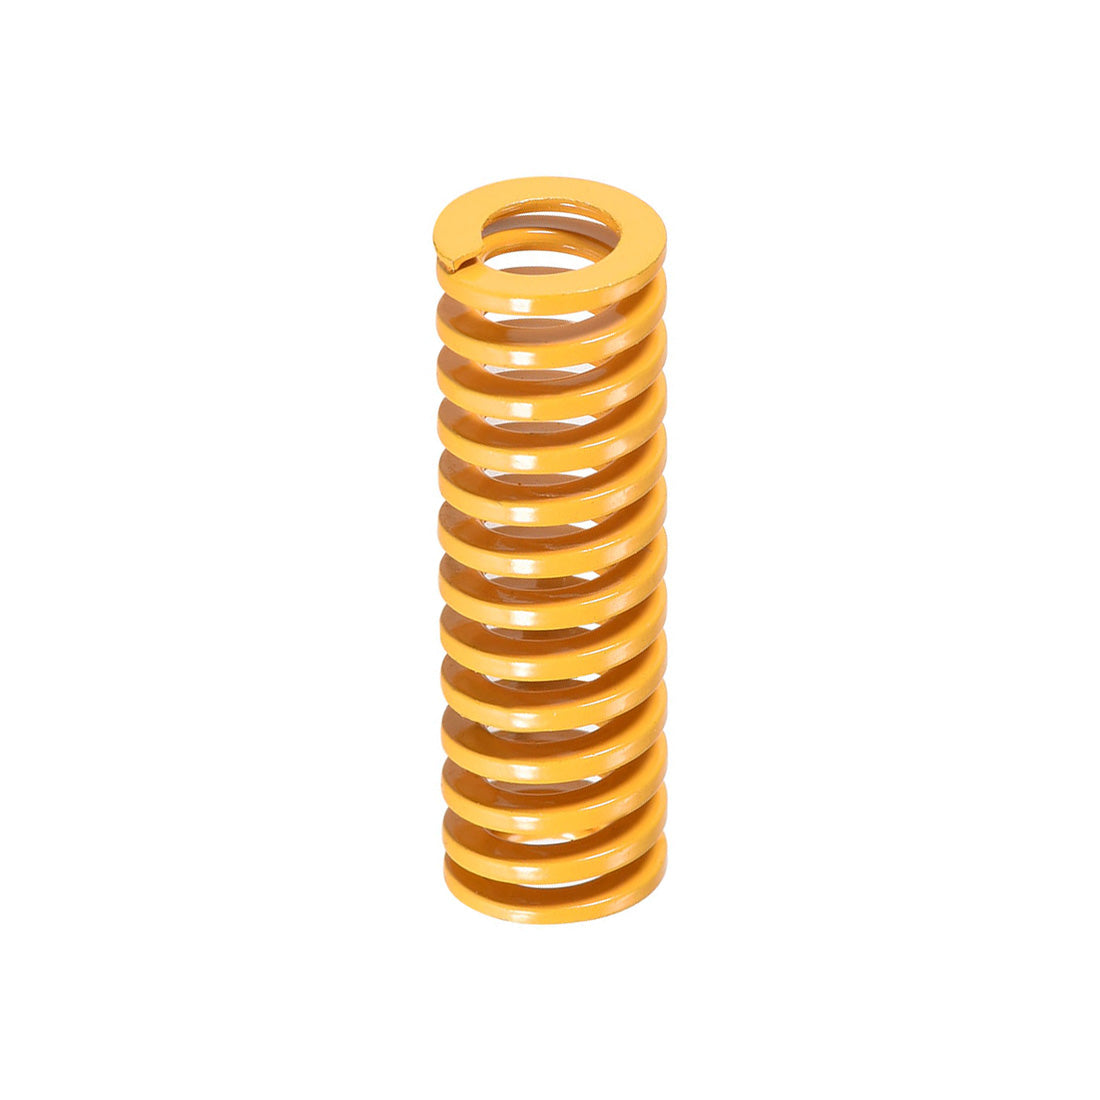 Uxcell Uxcell Heated Bed Springs for 3D Printer Light Load Compression Spring, 8 x 25 mm 10pcs